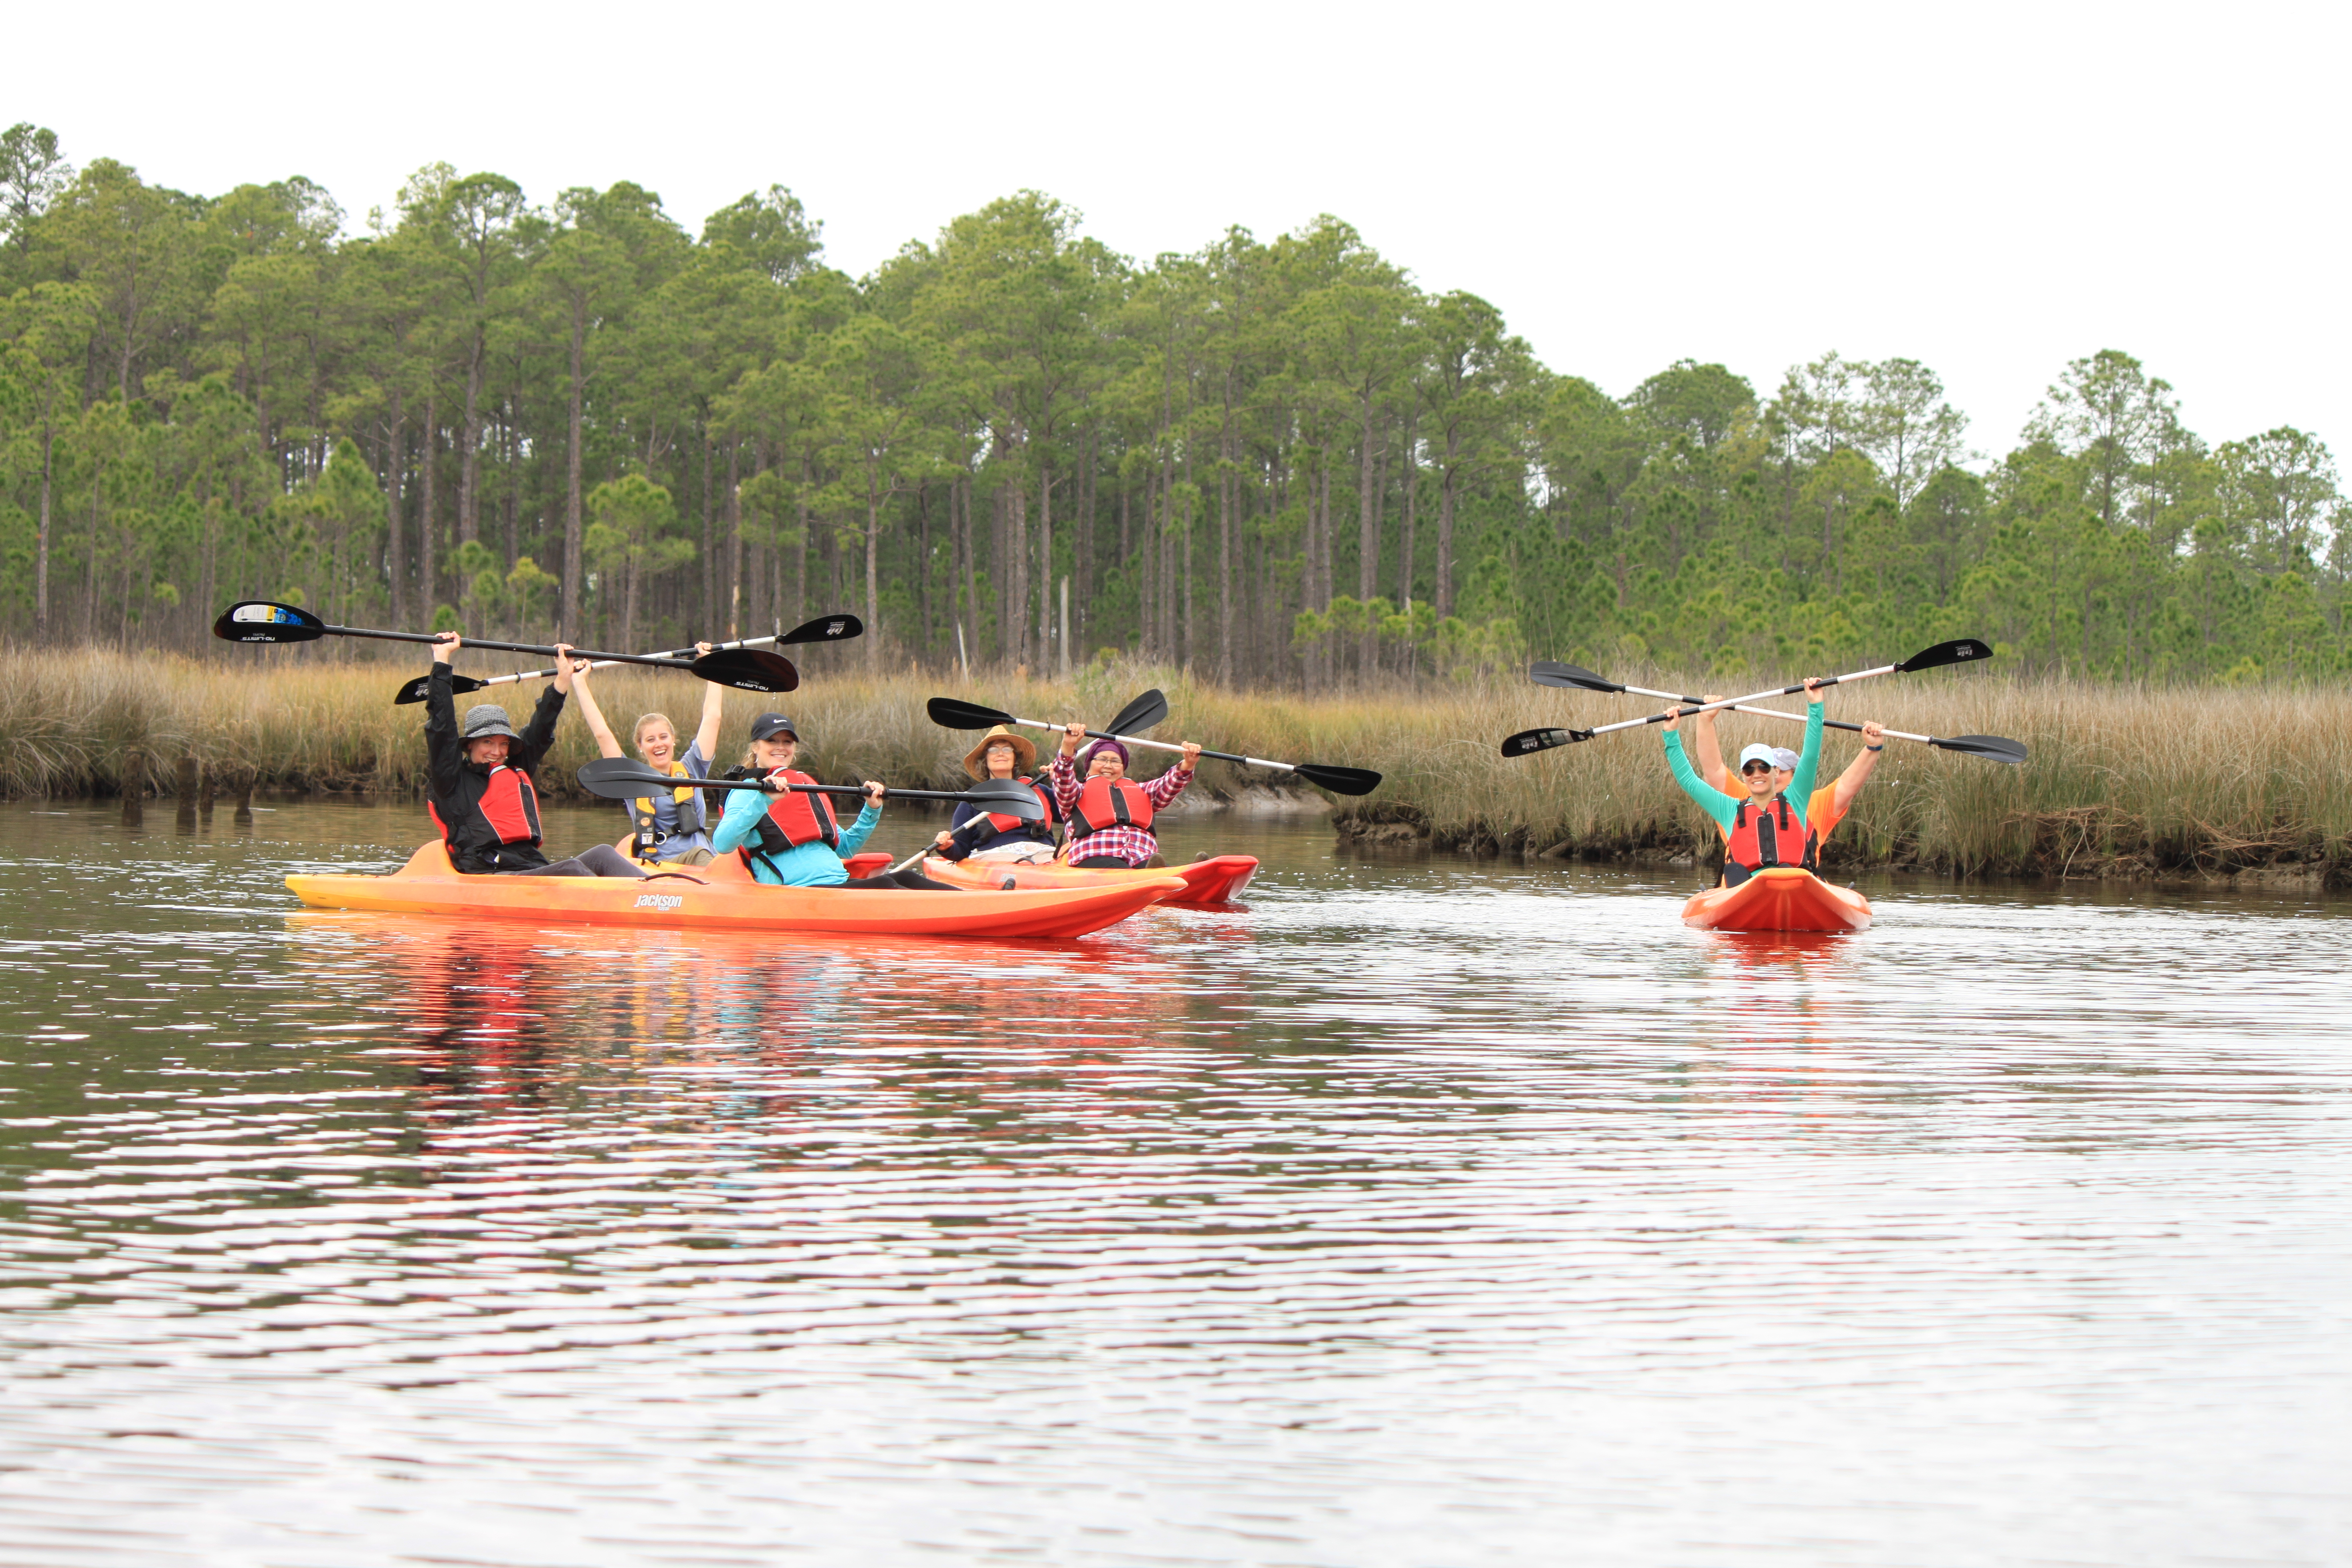 People in three waterborne canoes raise their paddles, with marsh and trees in background.